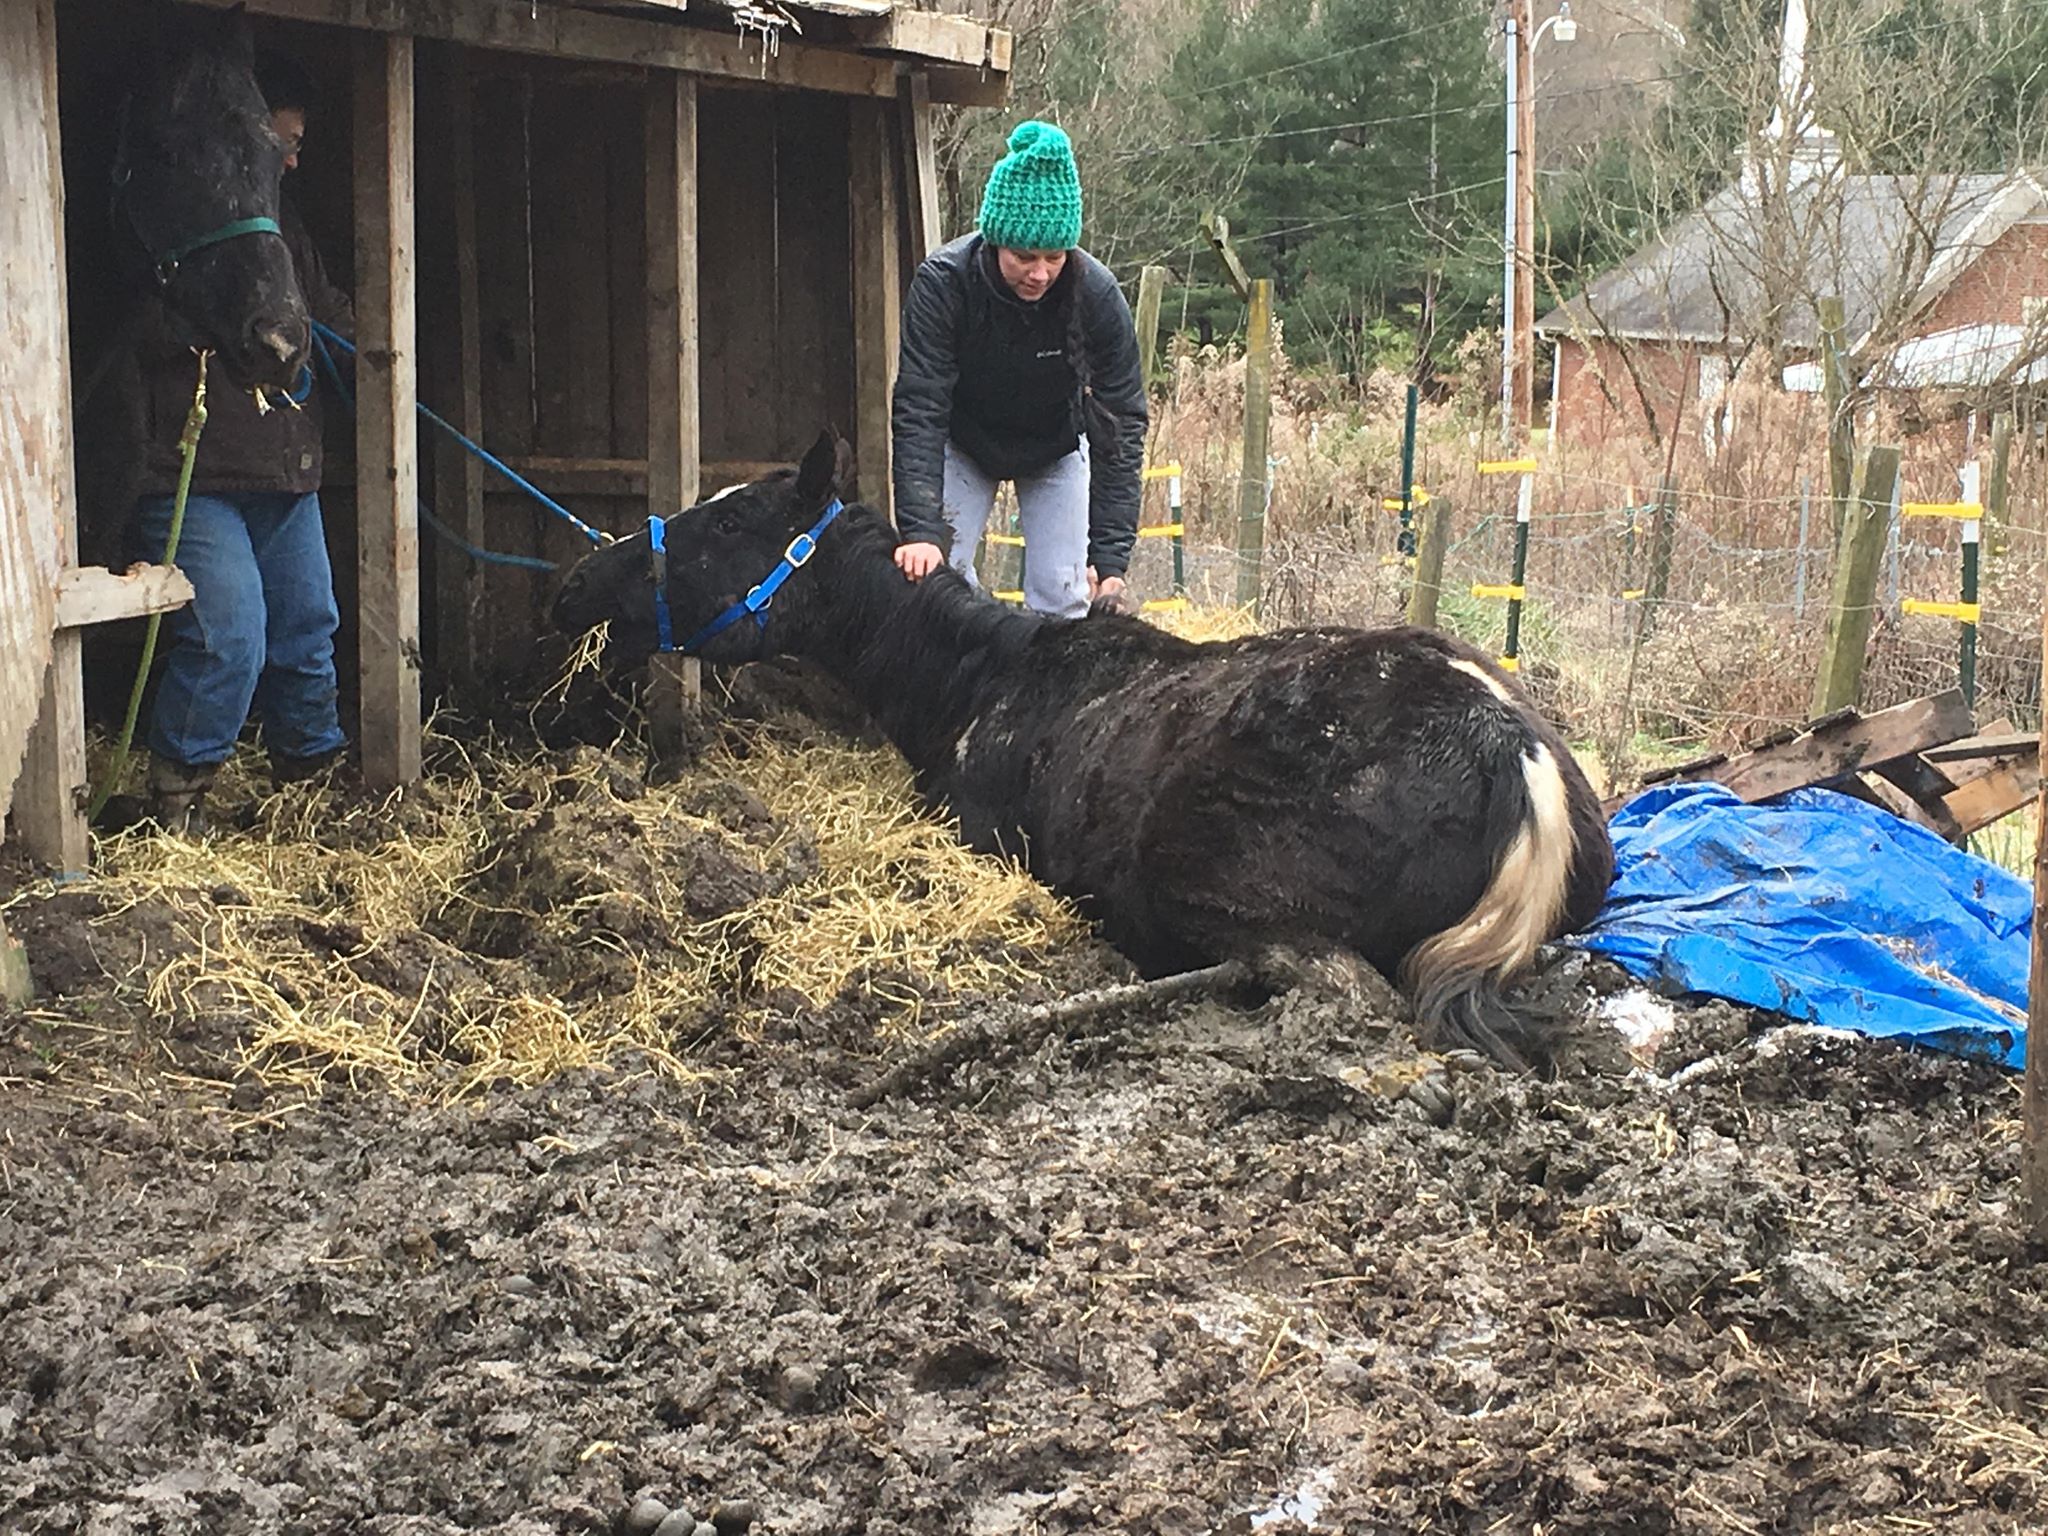 Appalachian Poverty and Good Intentions: The Mud Ponies